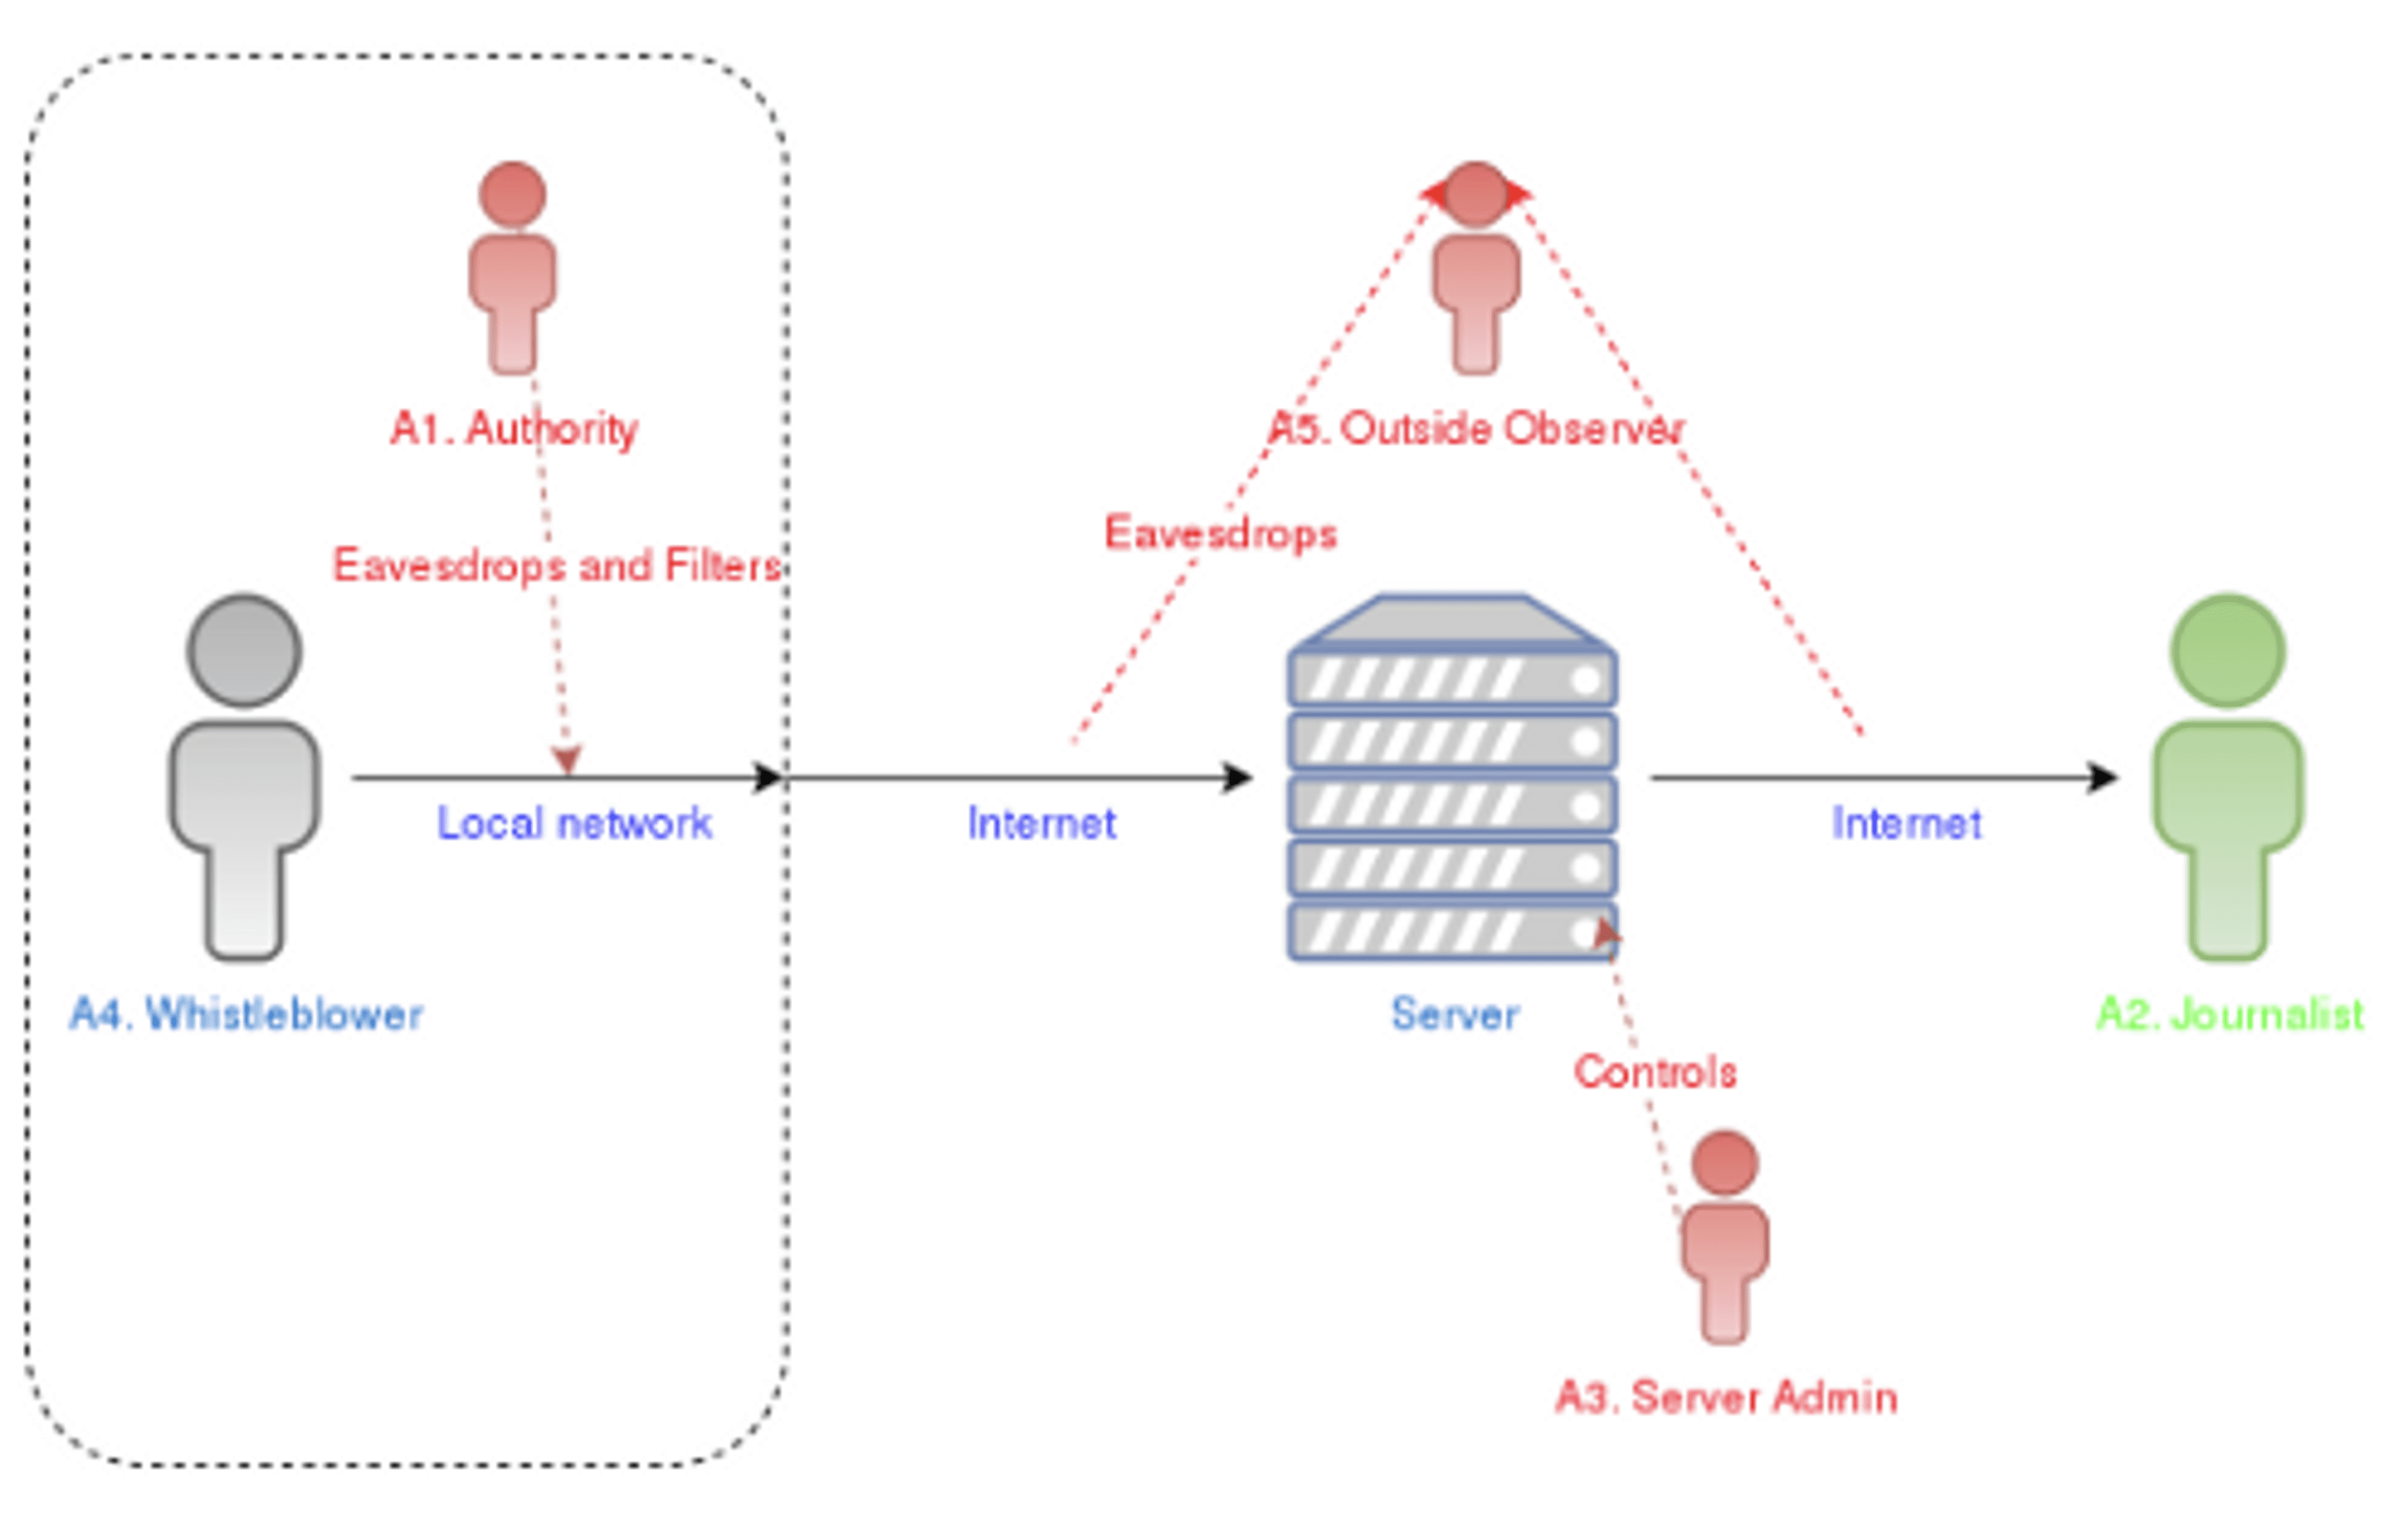 Diagram showing the process of information distribution via networks